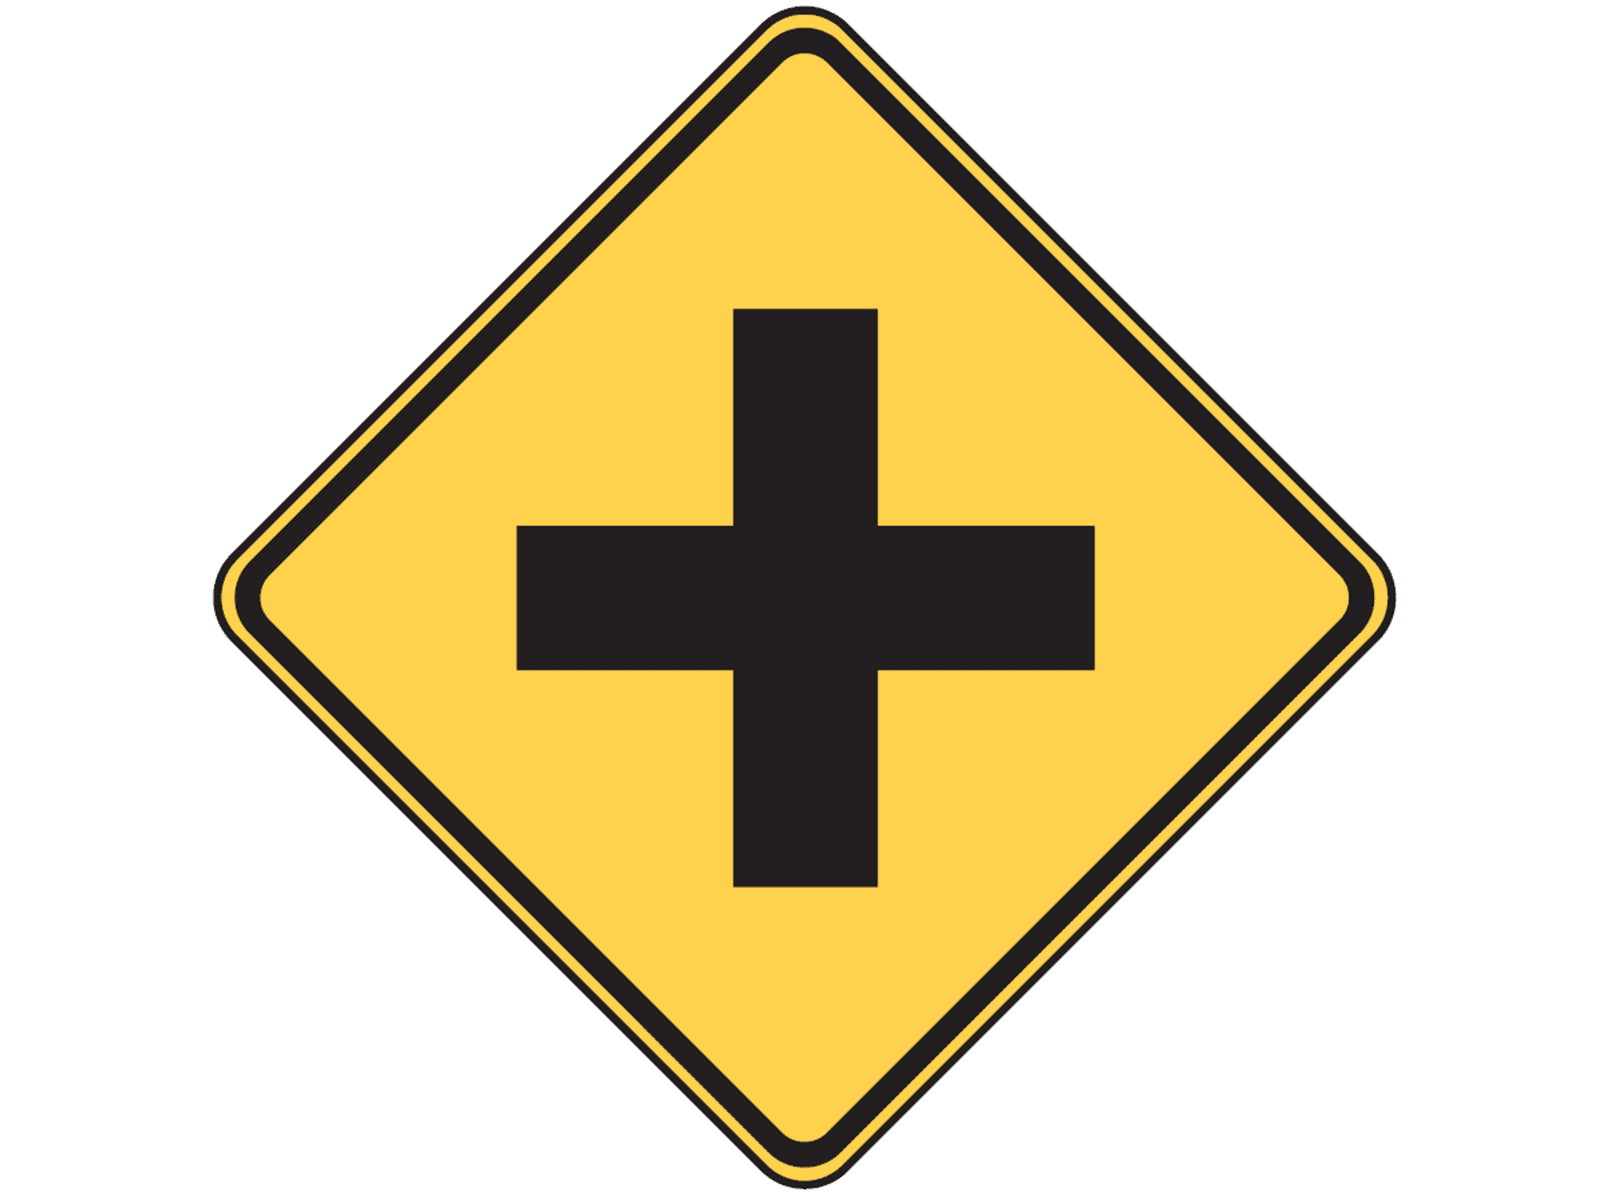 Intersection W2-1 - W2: Intersections